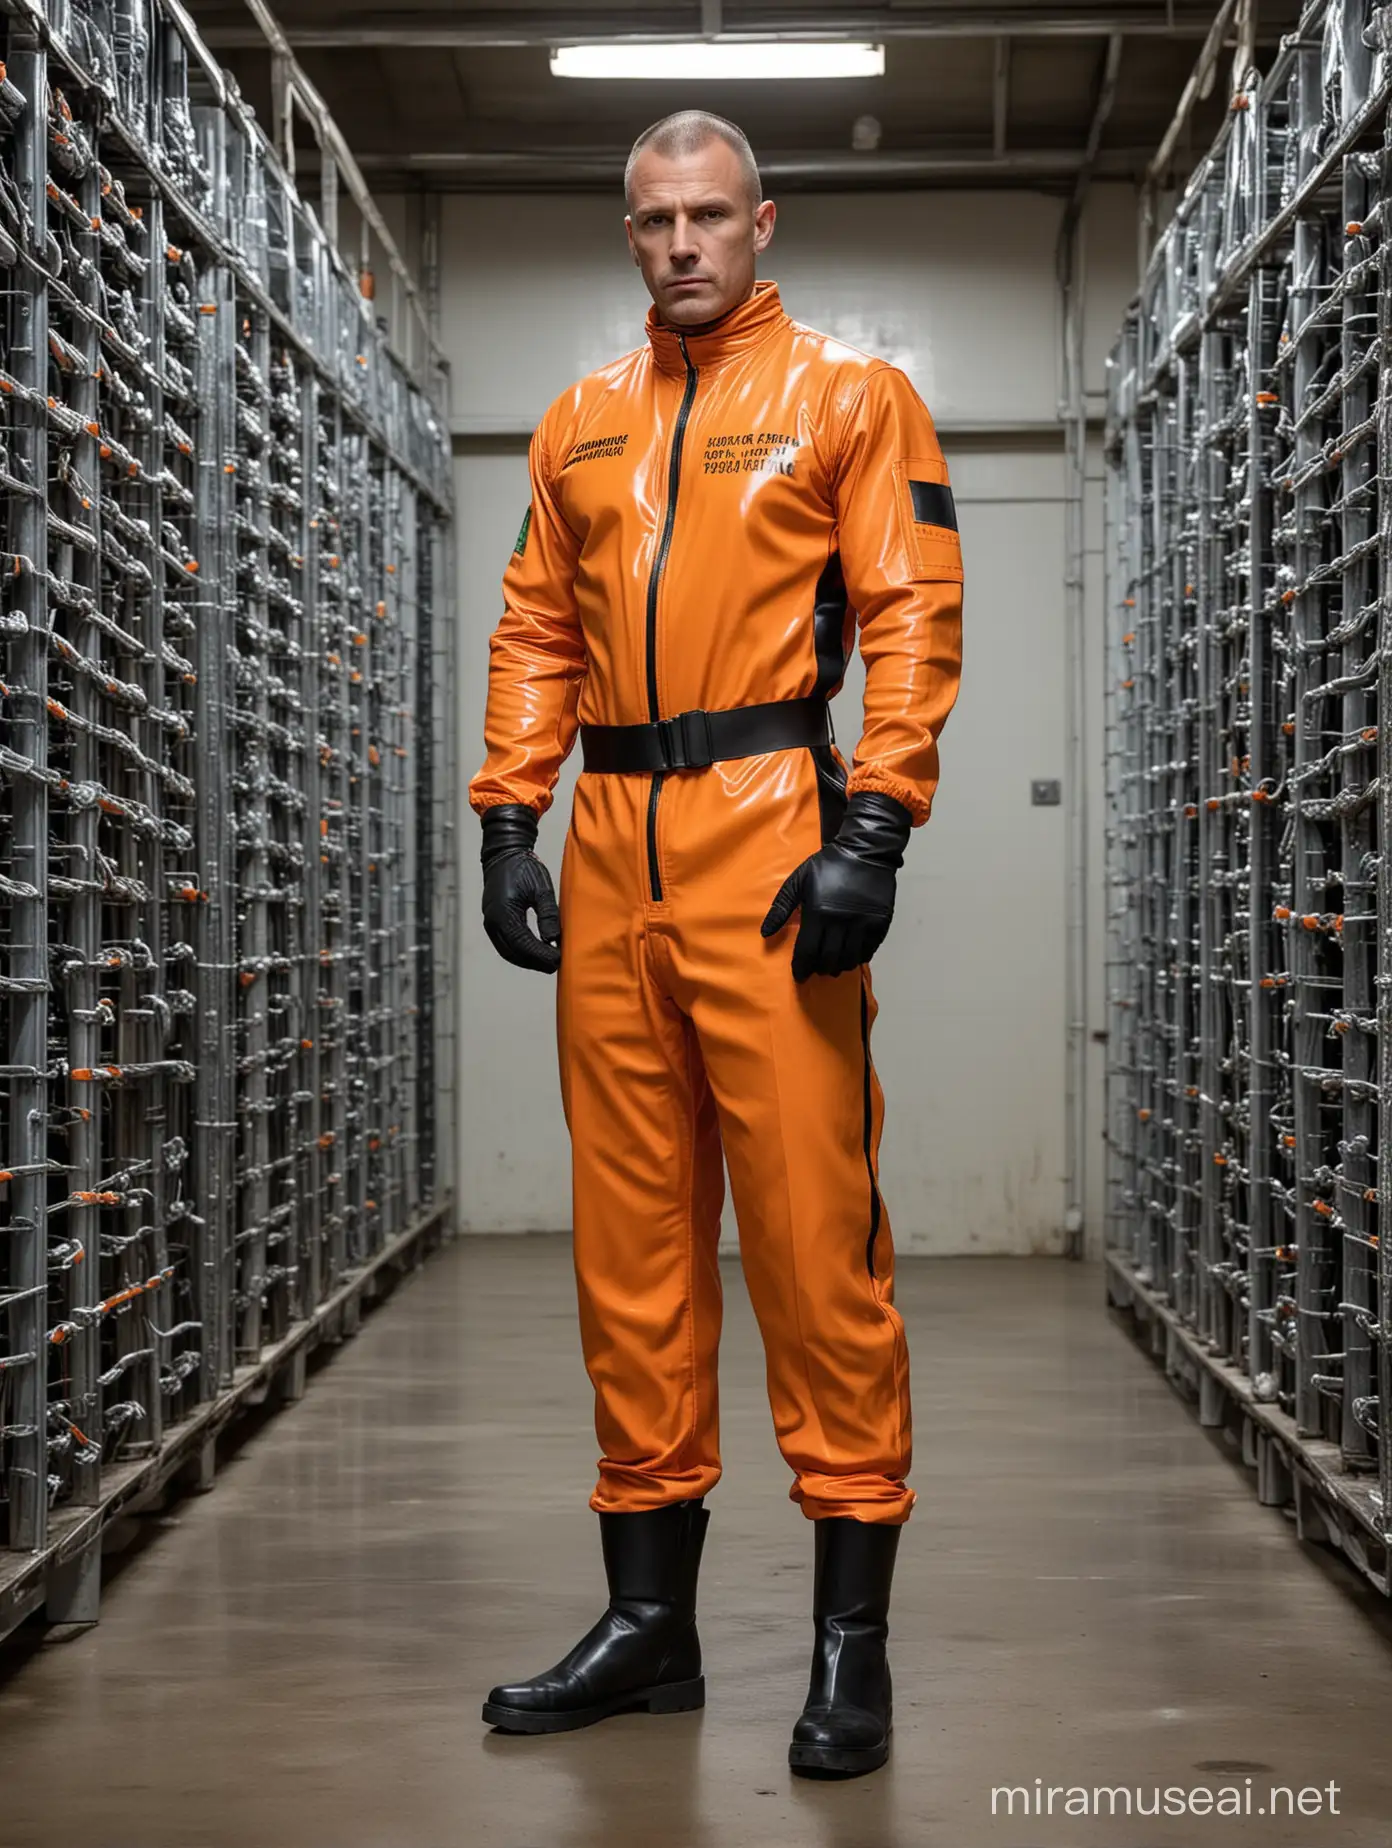 In a futuristic high warehouse with rows fit and muscular men in skin tight shiny orange rubber jumpsuits sealed in glass cylinders, a ruggedly handsome and muscular prison guard in his mid 40's wearing a tight black rubber prison guard suit is holding open a orange rubber prison jumpsuit with the word INMATE on it, inside the jumpsuit silver printed circuits lines can be seen as he offers it to a prisoner to put on